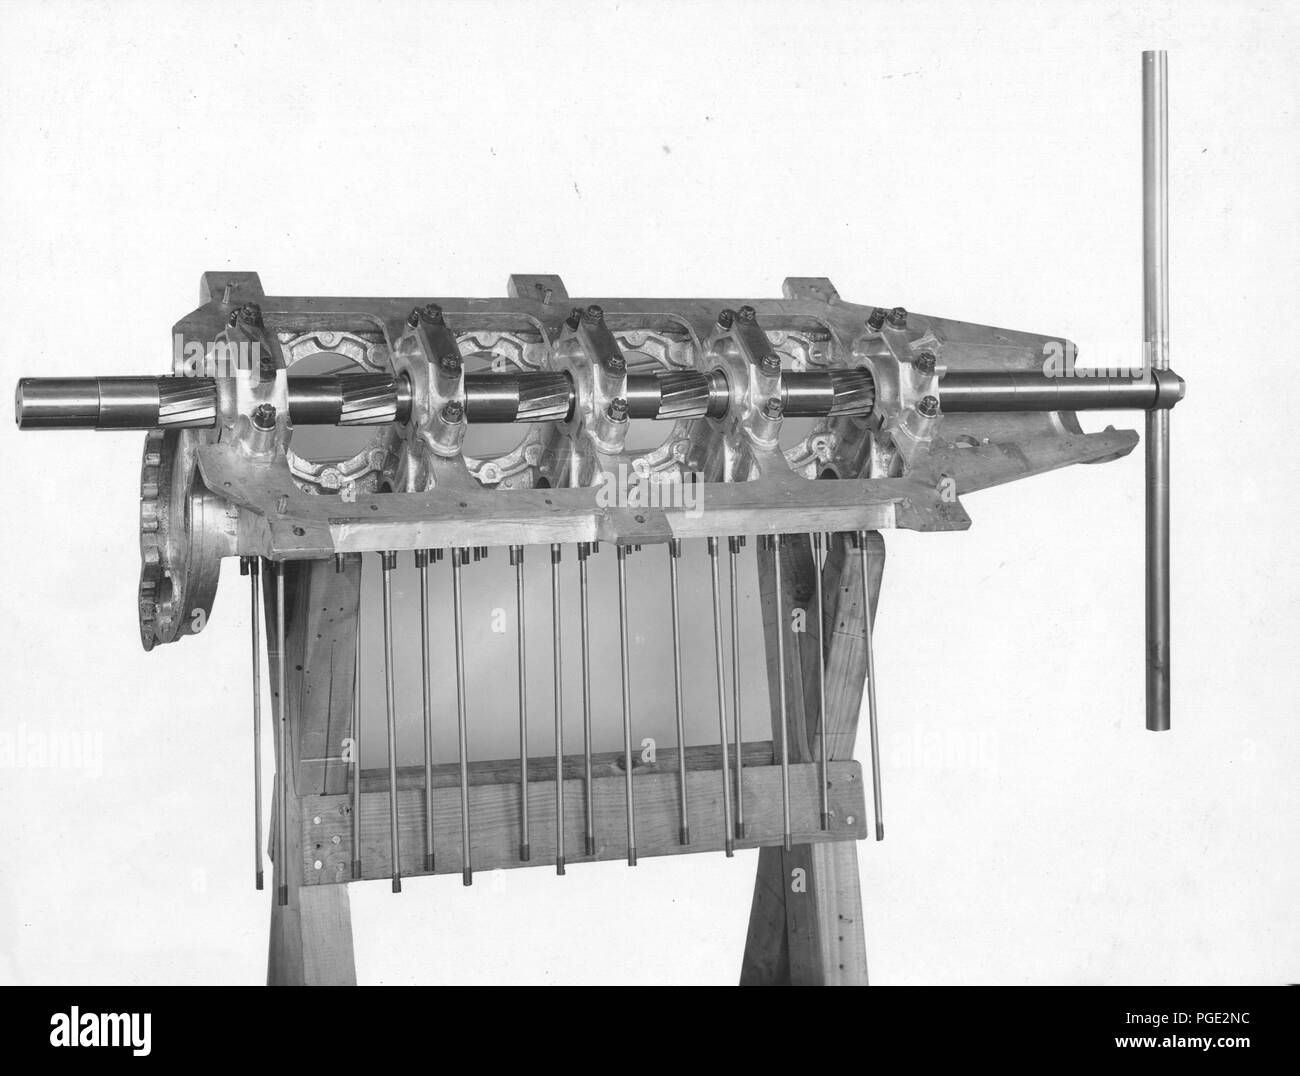 Curtiss aeroplane and motor corporation, Buffalo, N.Y. Progressive assembly operation No. 2, reaming main bearings. Curtiss Aeroplane & Motor Corp 1918 Stock Photo